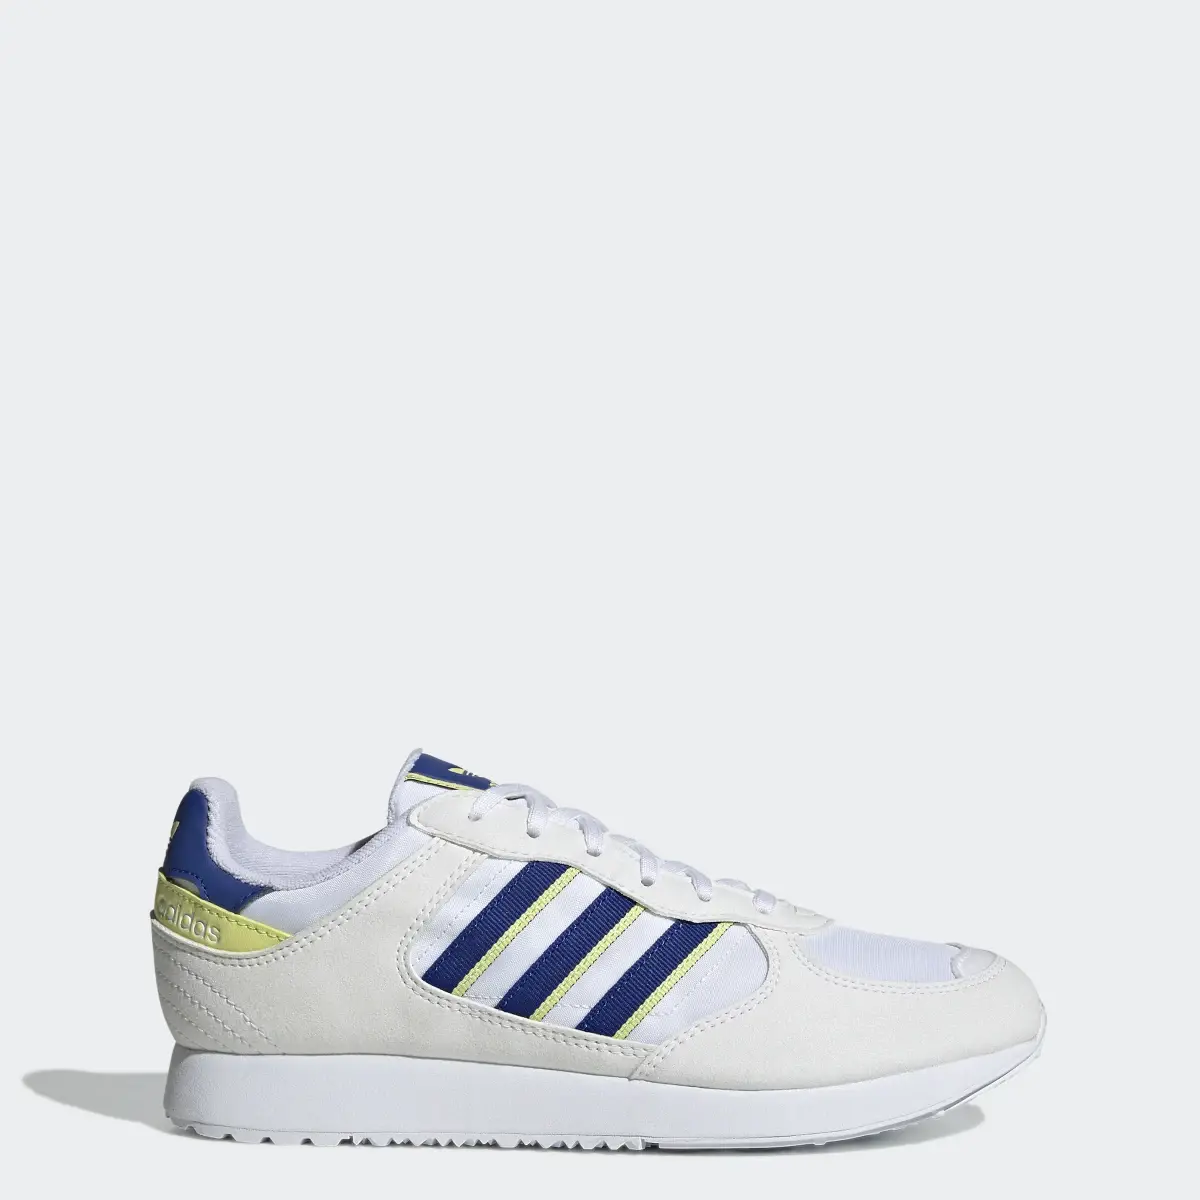 Adidas Special 21 Shoes. 1